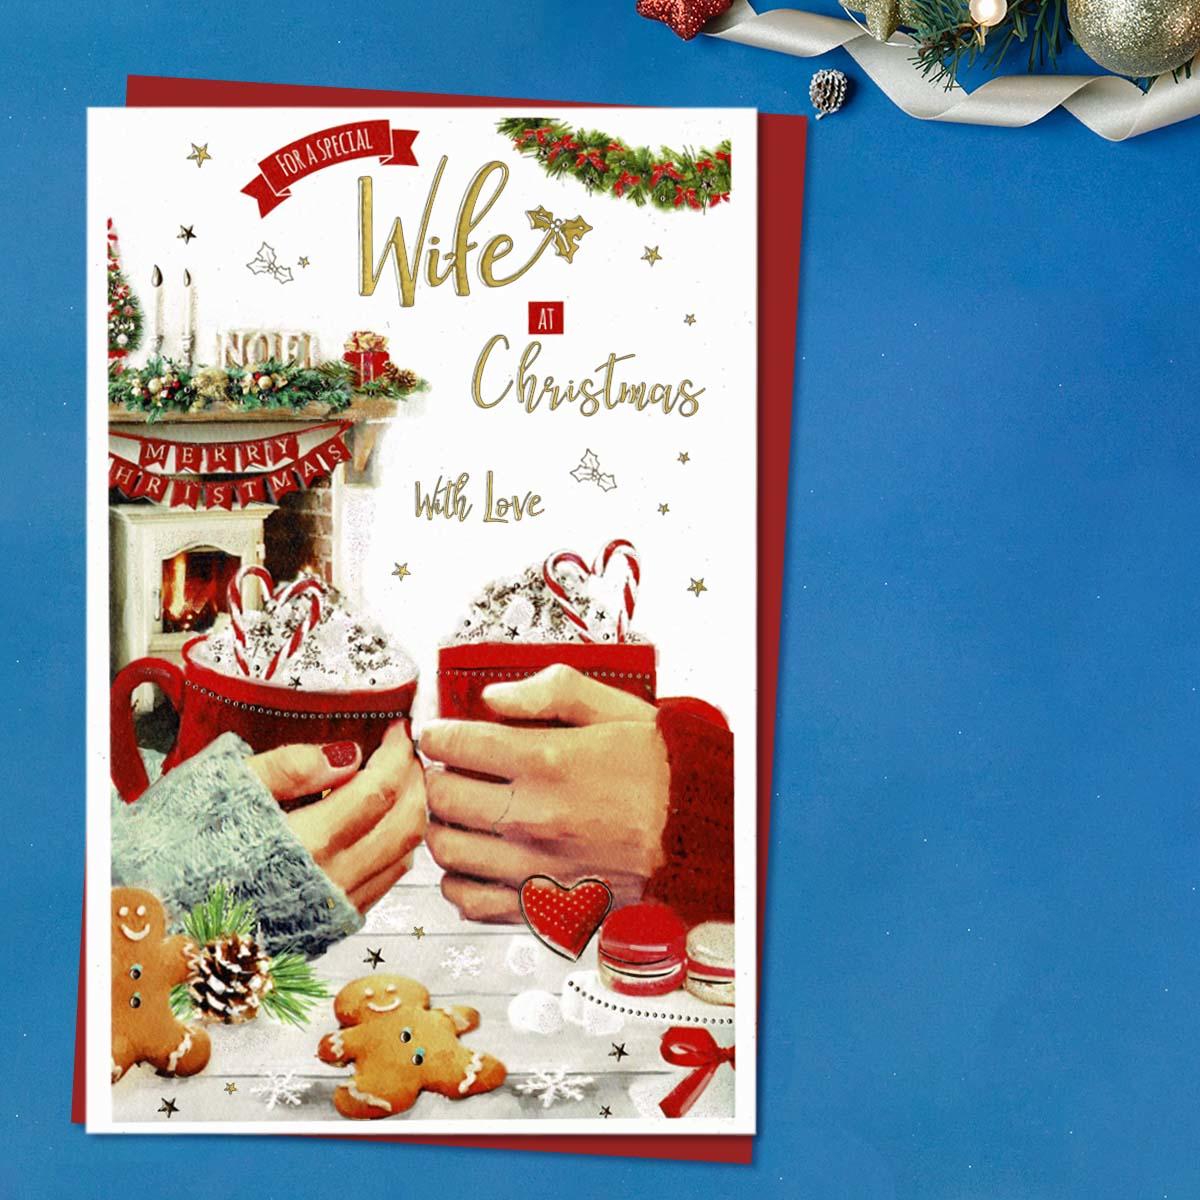 Special Wife Christmas Hot Chocolates Card Front Image